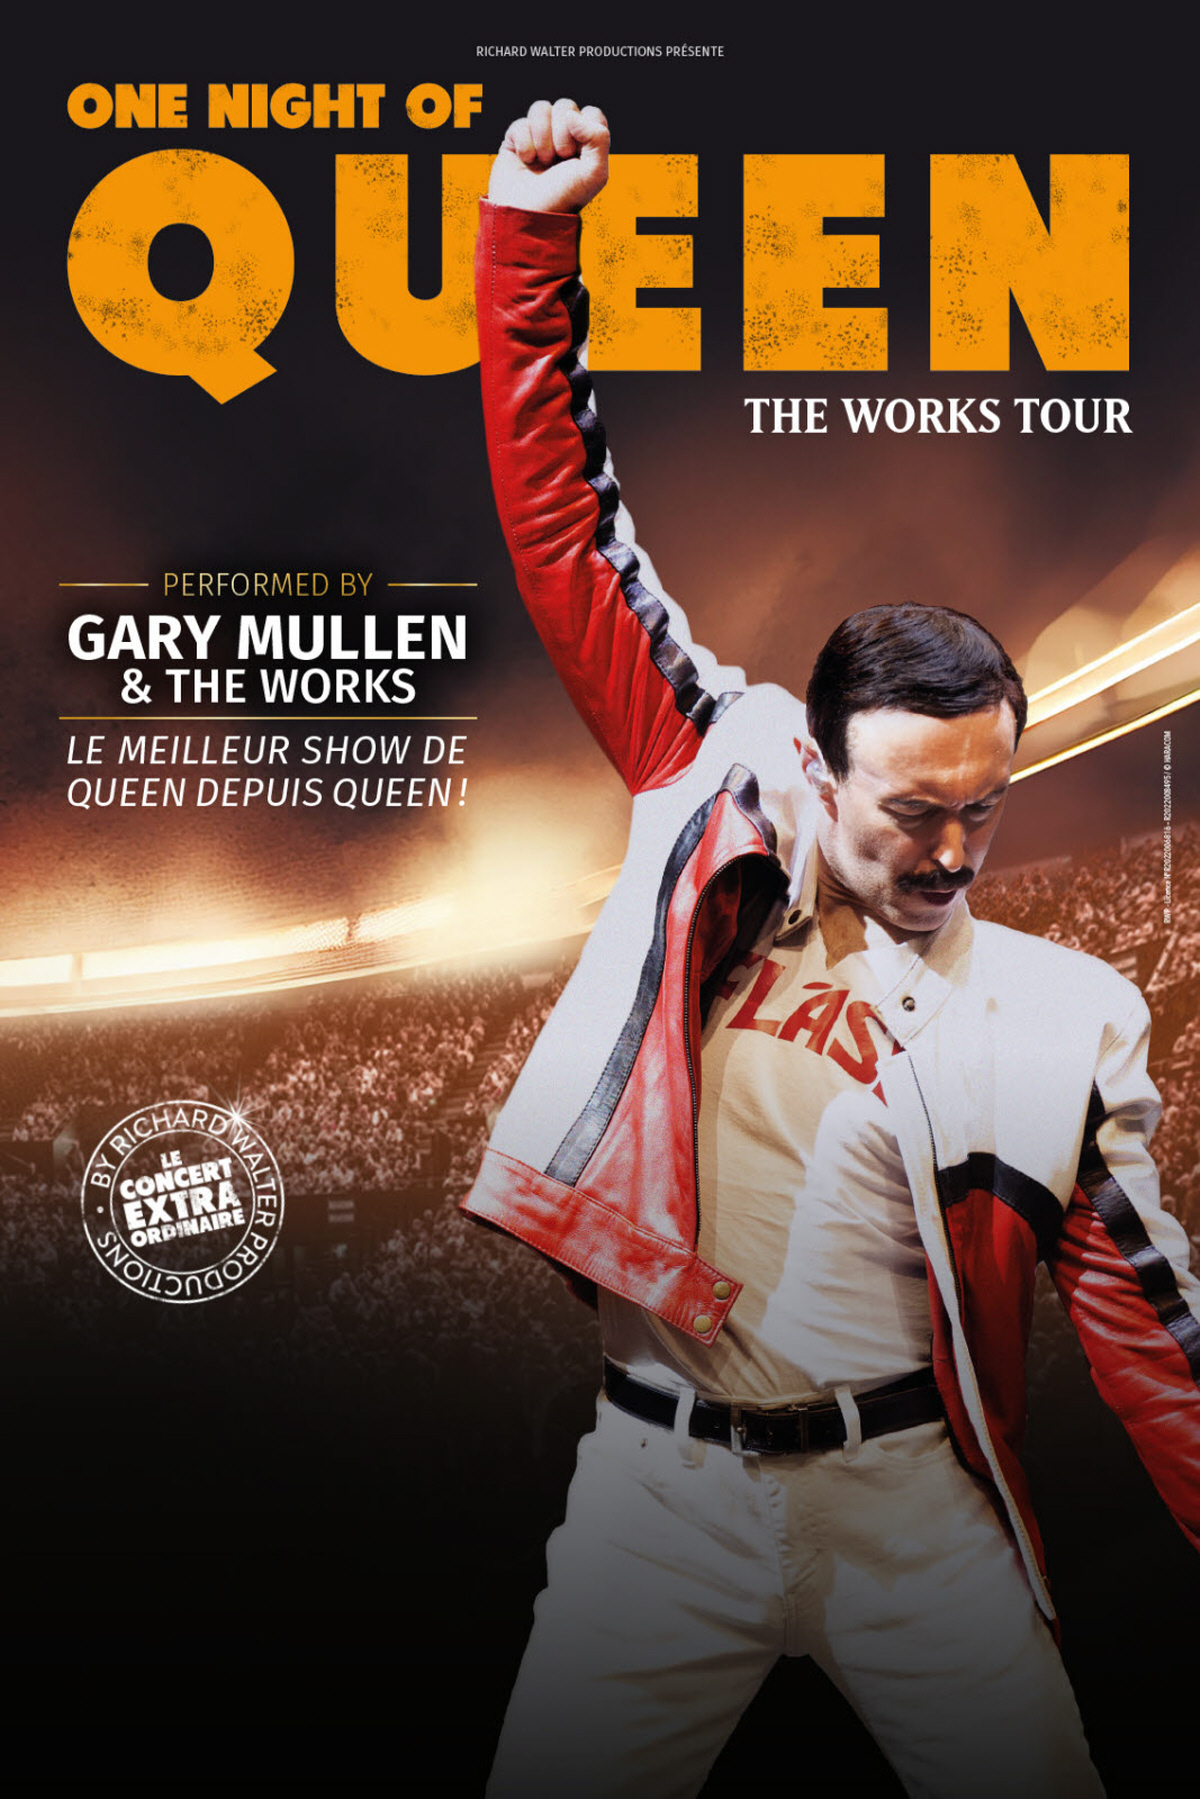 One Night Of Queen - The Works Tour at Elispace Tickets